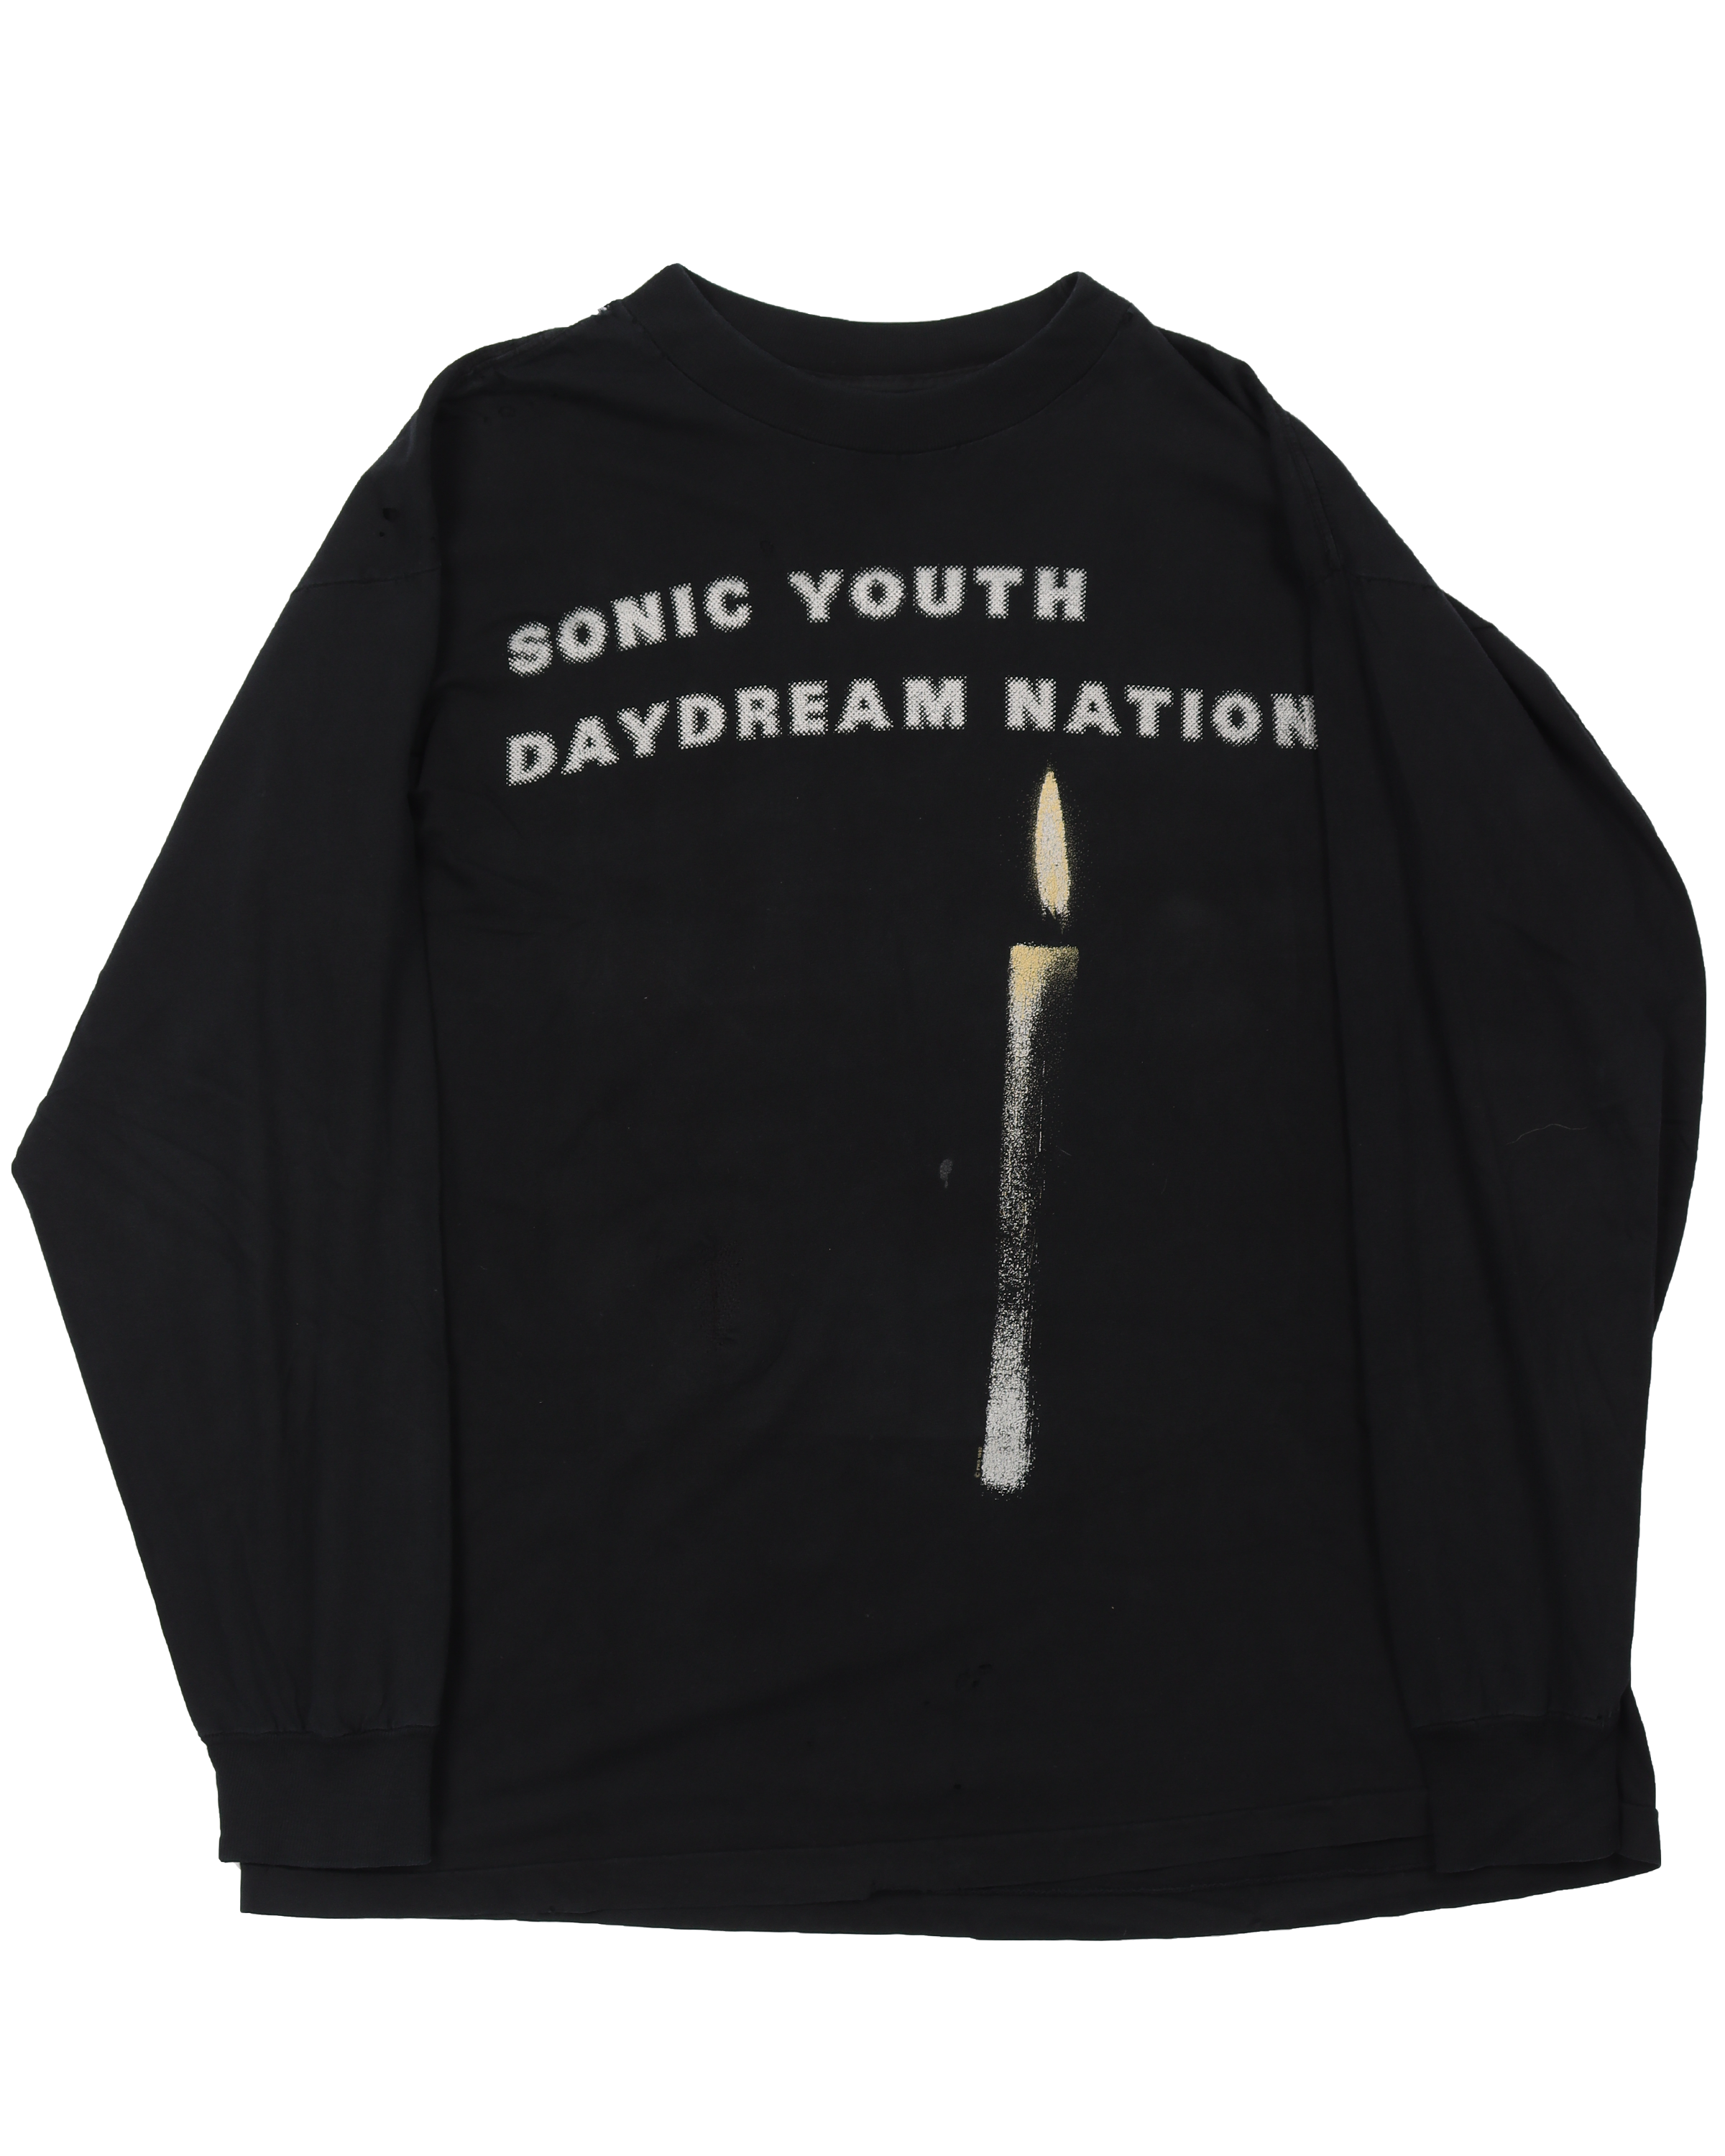 Sonic Youth Daydream Nation L/S T-Shirt